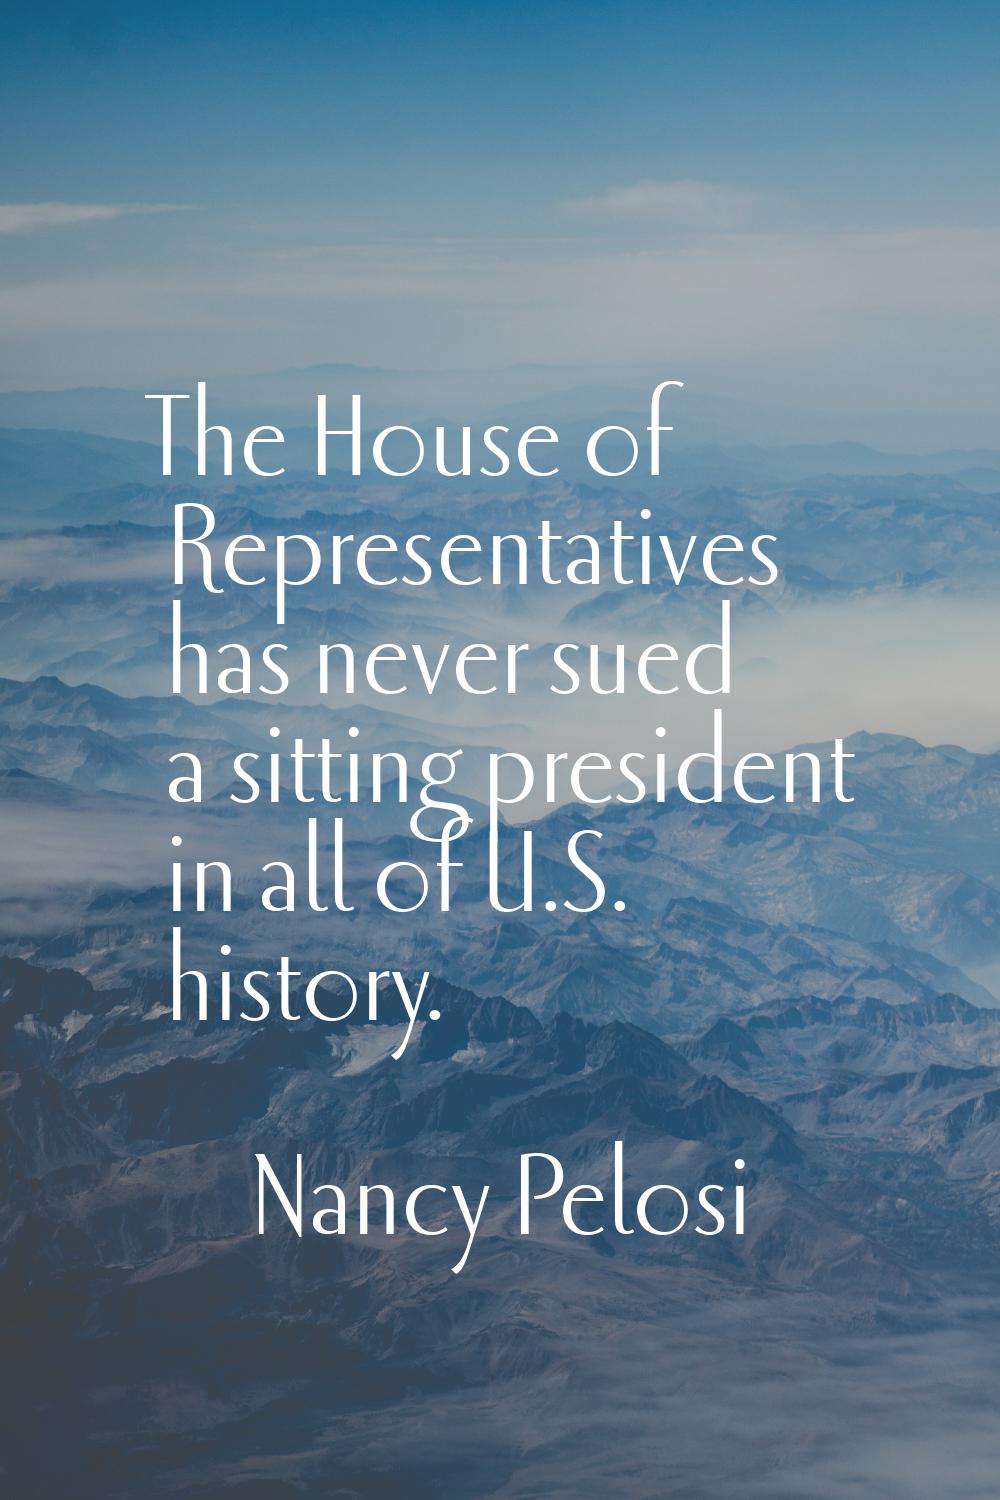 The House of Representatives has never sued a sitting president in all of U.S. history.